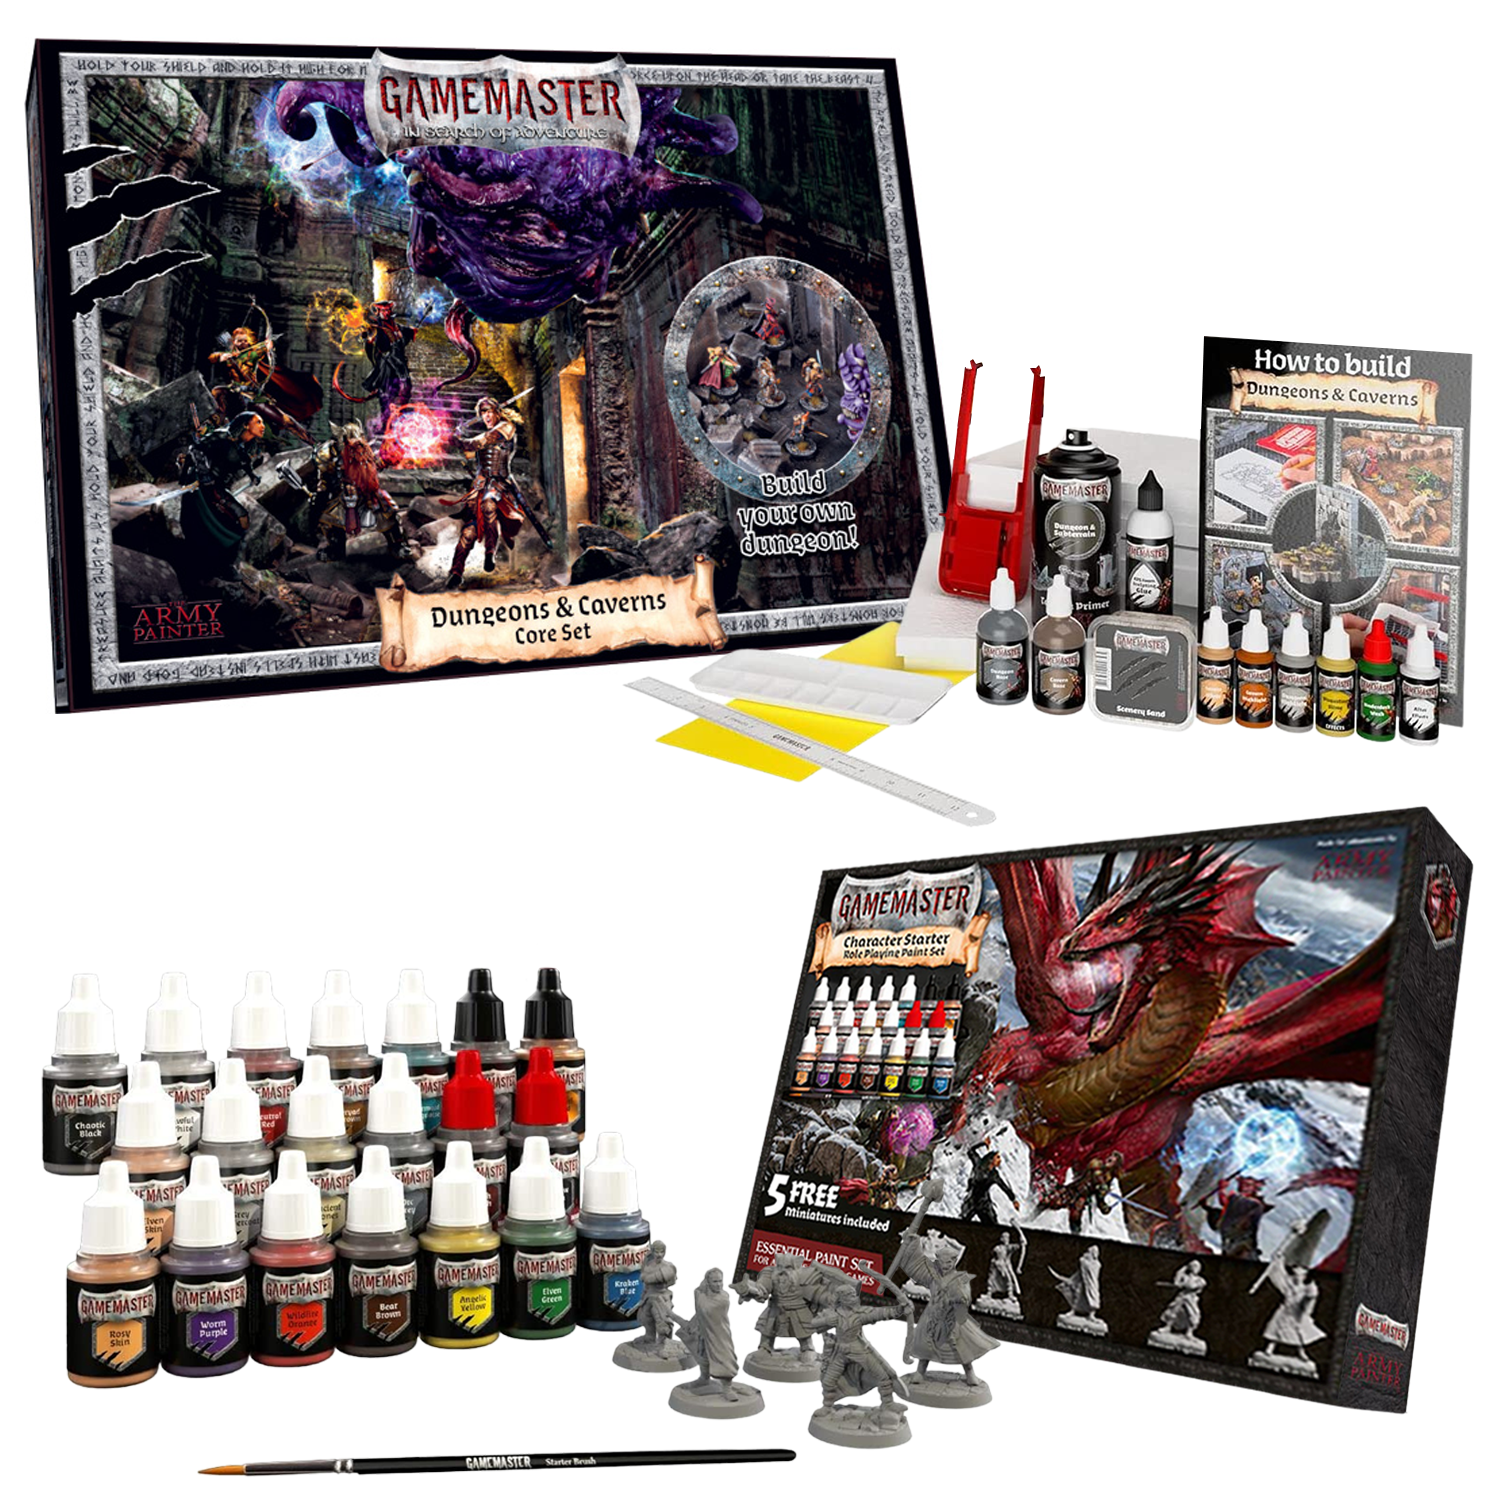 The Army Painter - Gamemaster: Character Paint Set + Dungeons & Cavern Core Set Bundle